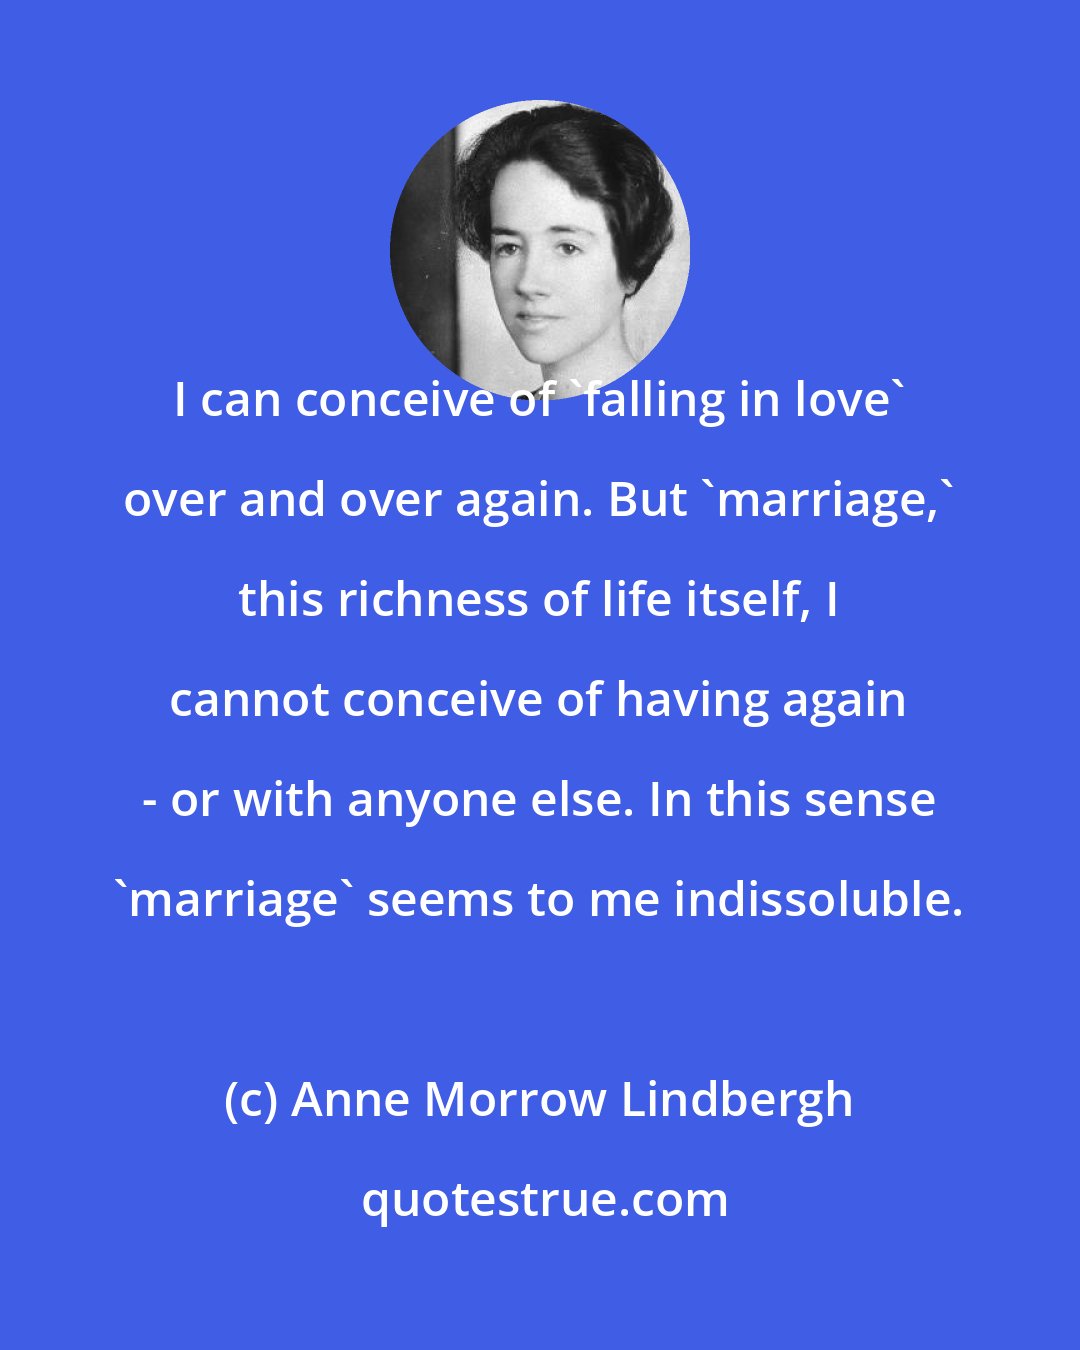 Anne Morrow Lindbergh: I can conceive of 'falling in love' over and over again. But 'marriage,' this richness of life itself, I cannot conceive of having again - or with anyone else. In this sense 'marriage' seems to me indissoluble.